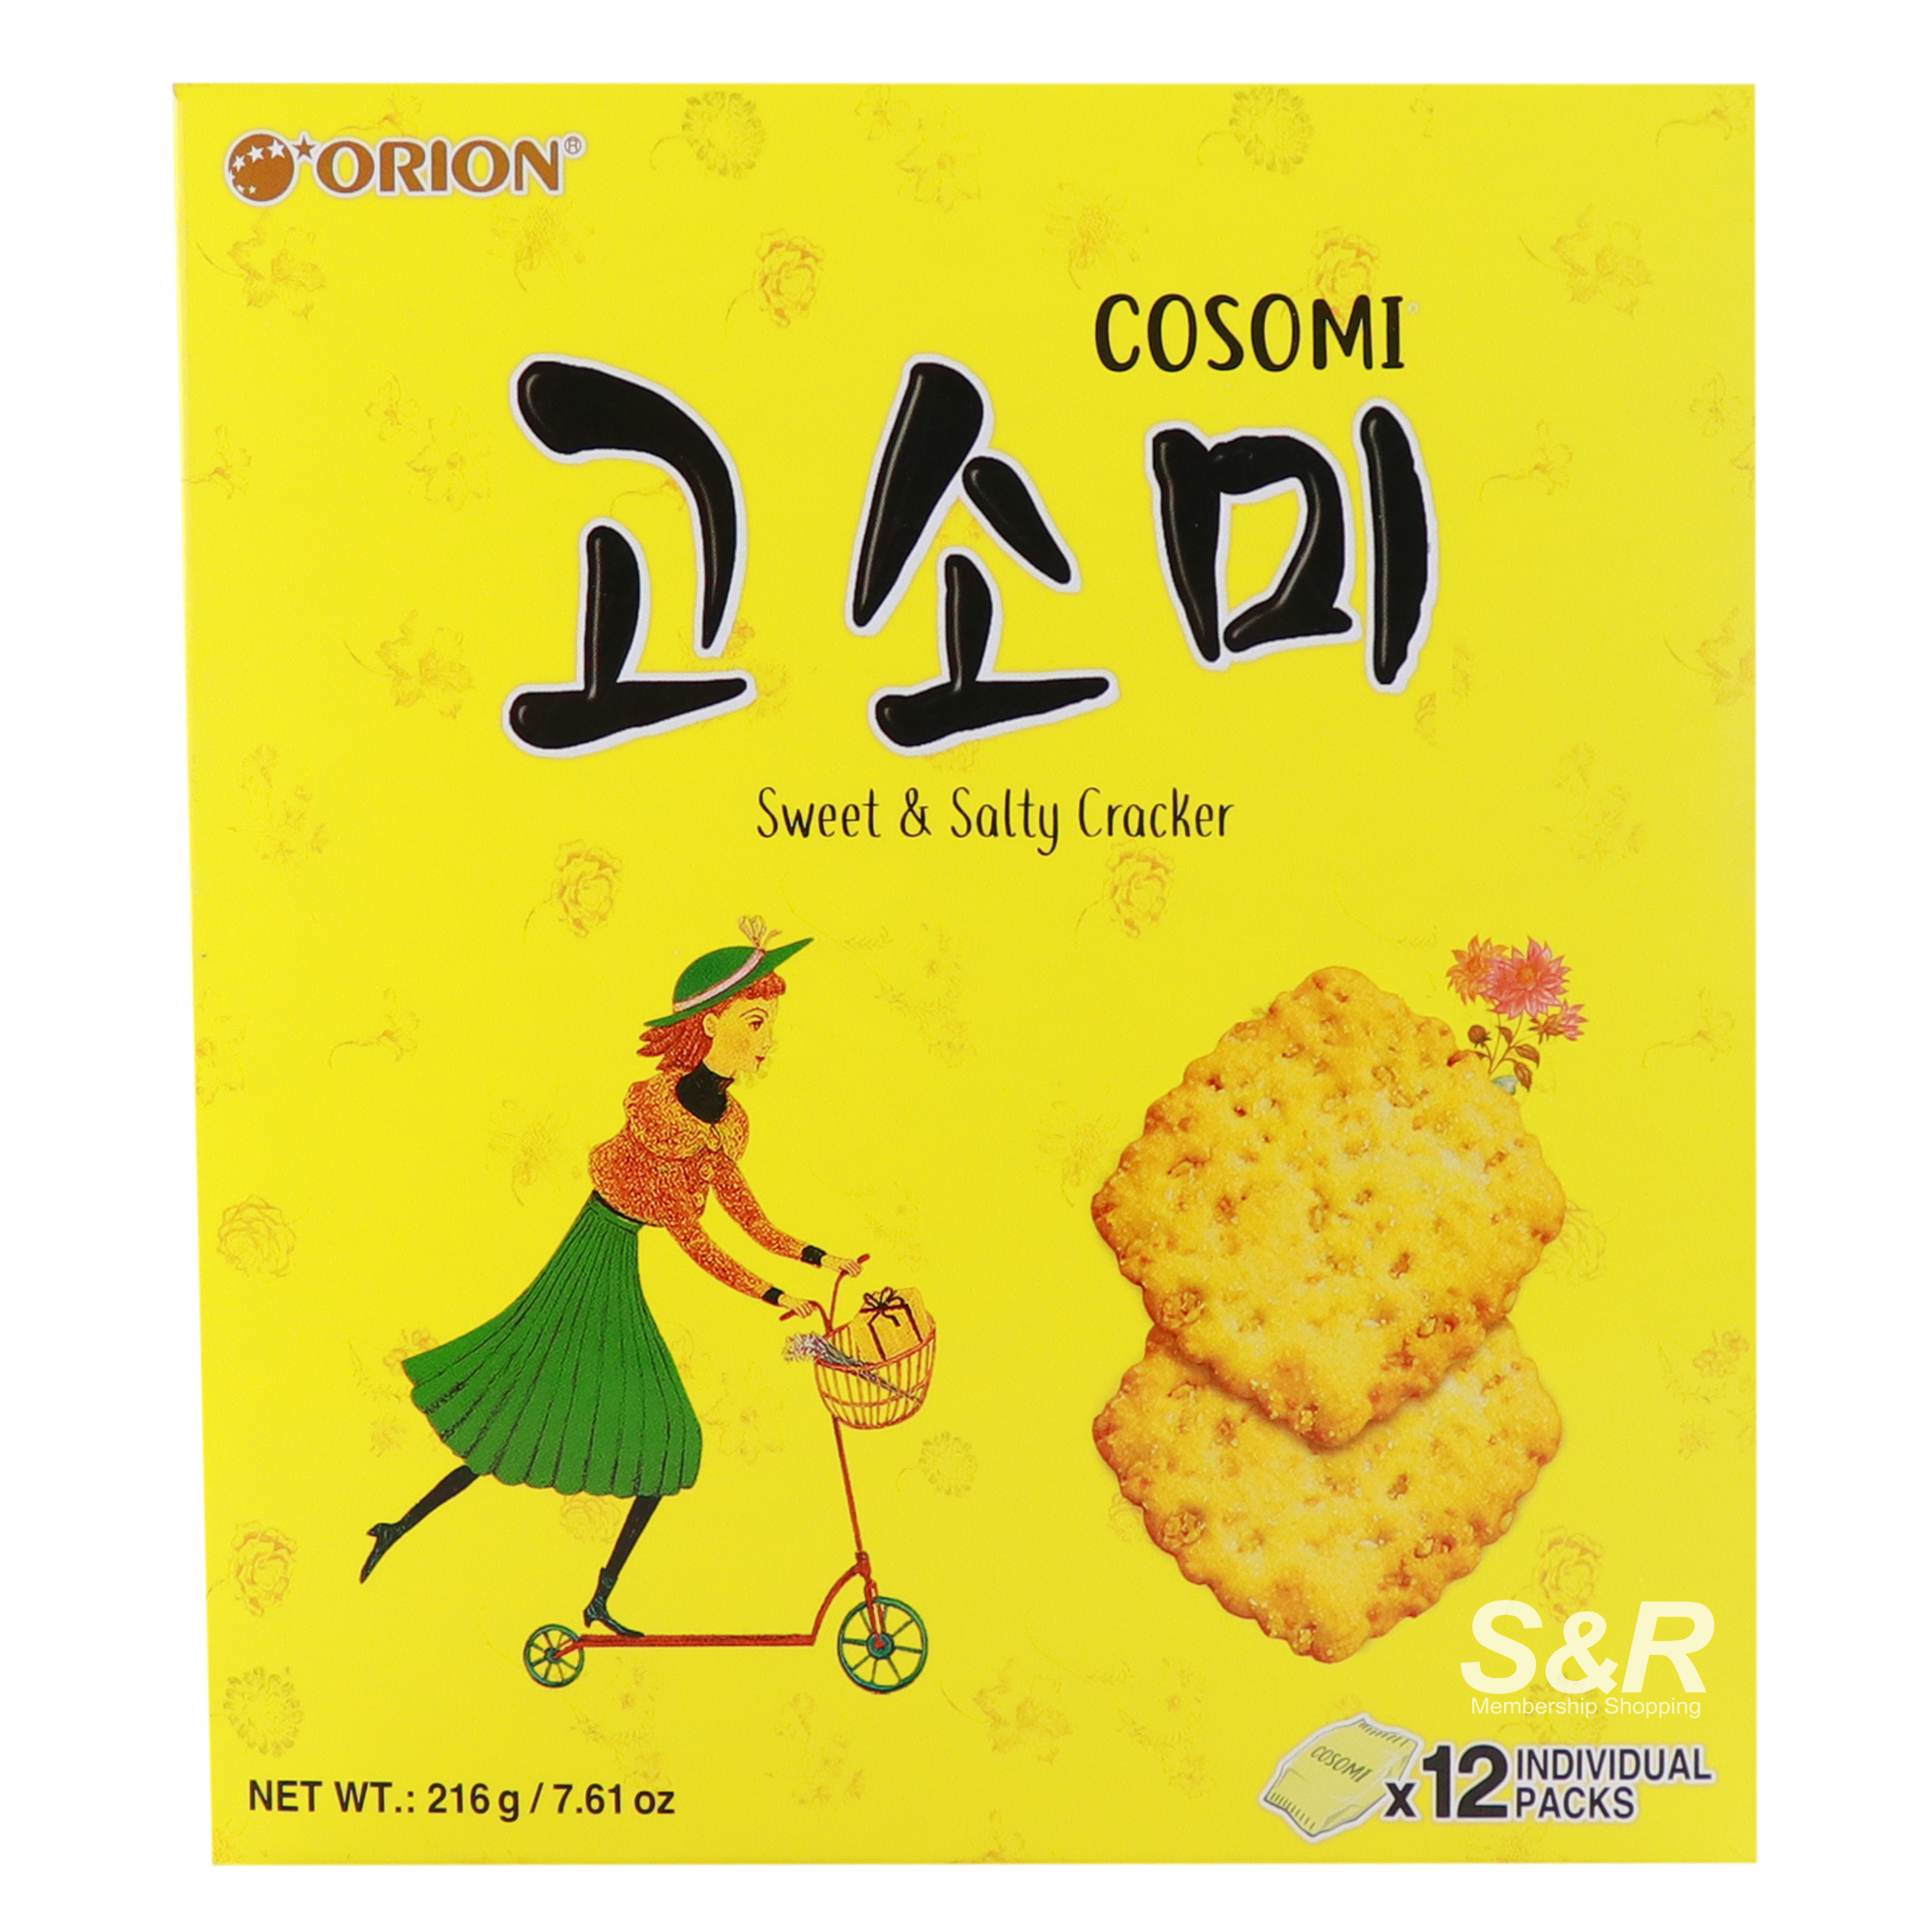 Cosomi Sweet and Salty Cracker 12 packs